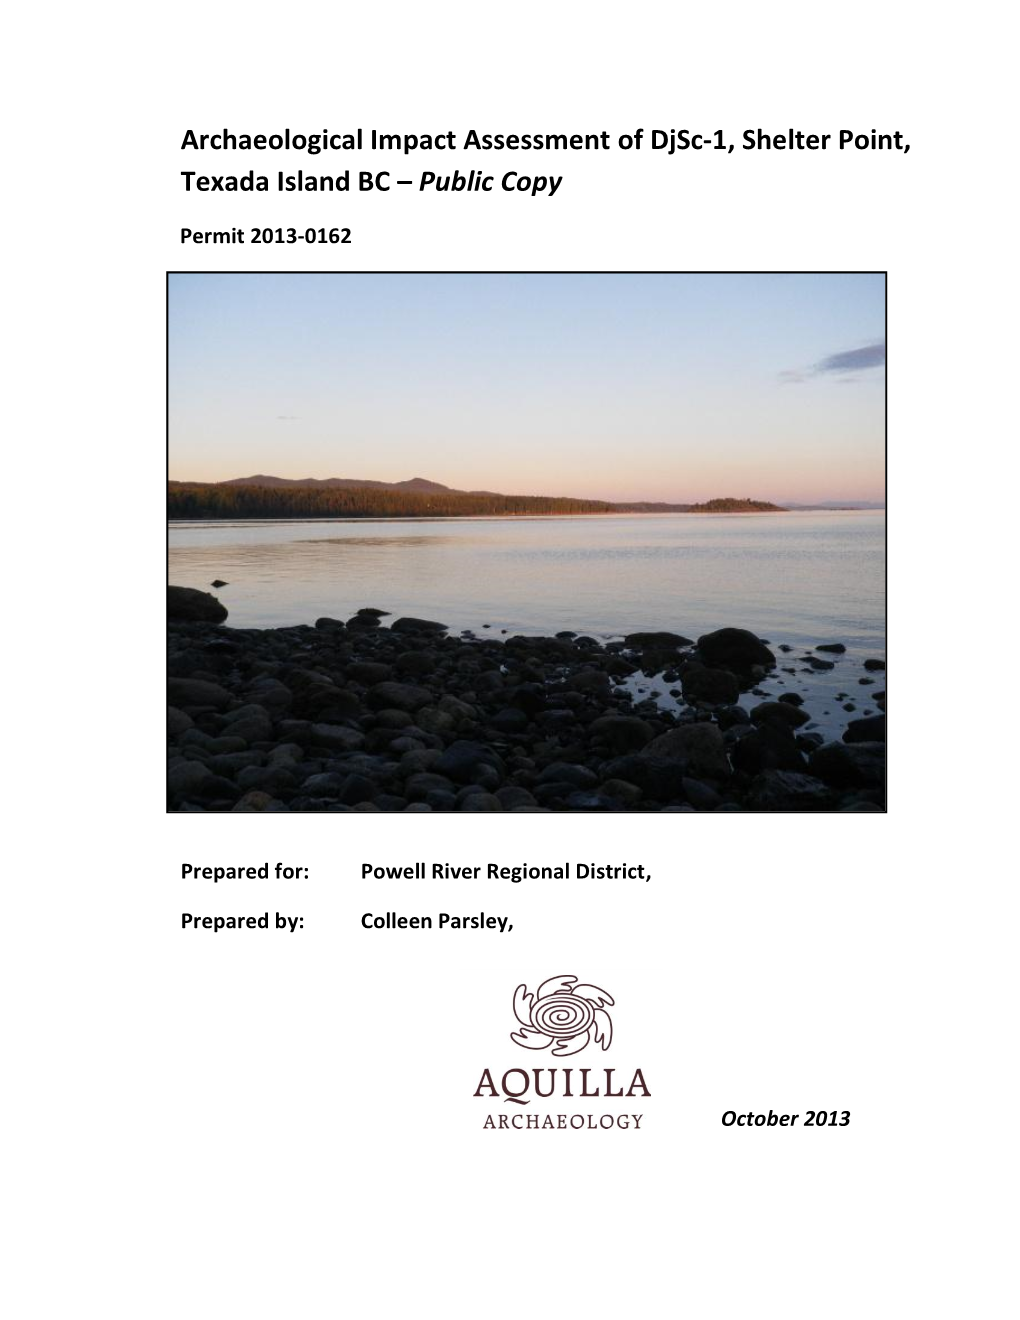 Archaeological Impact Assessment of Djsc-1, Shelter Point, Texada Island BC – Public Copy